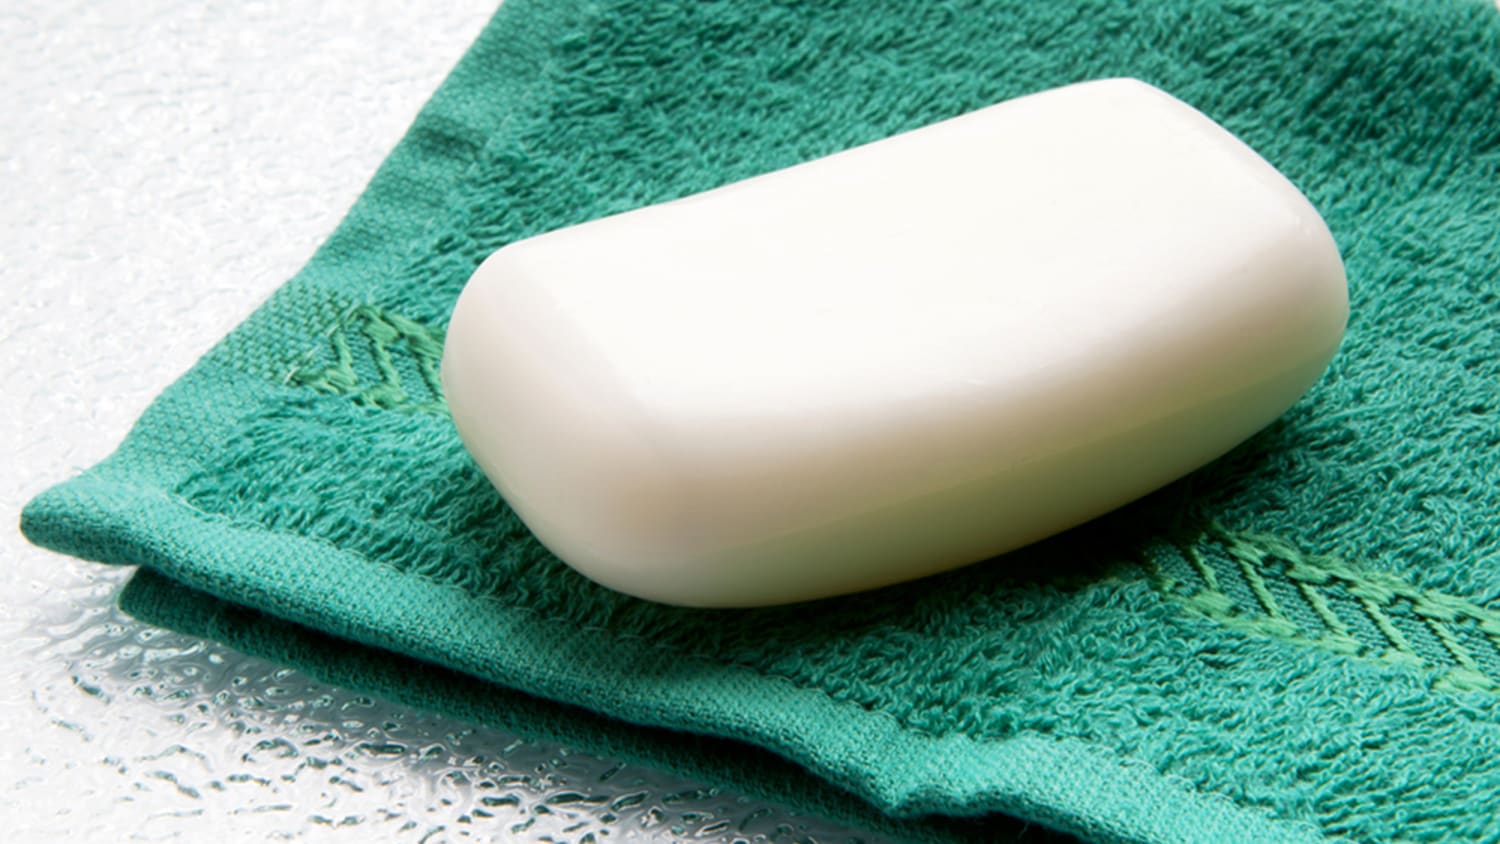 Americans are skipping bar soap and choosing liquid soap instead